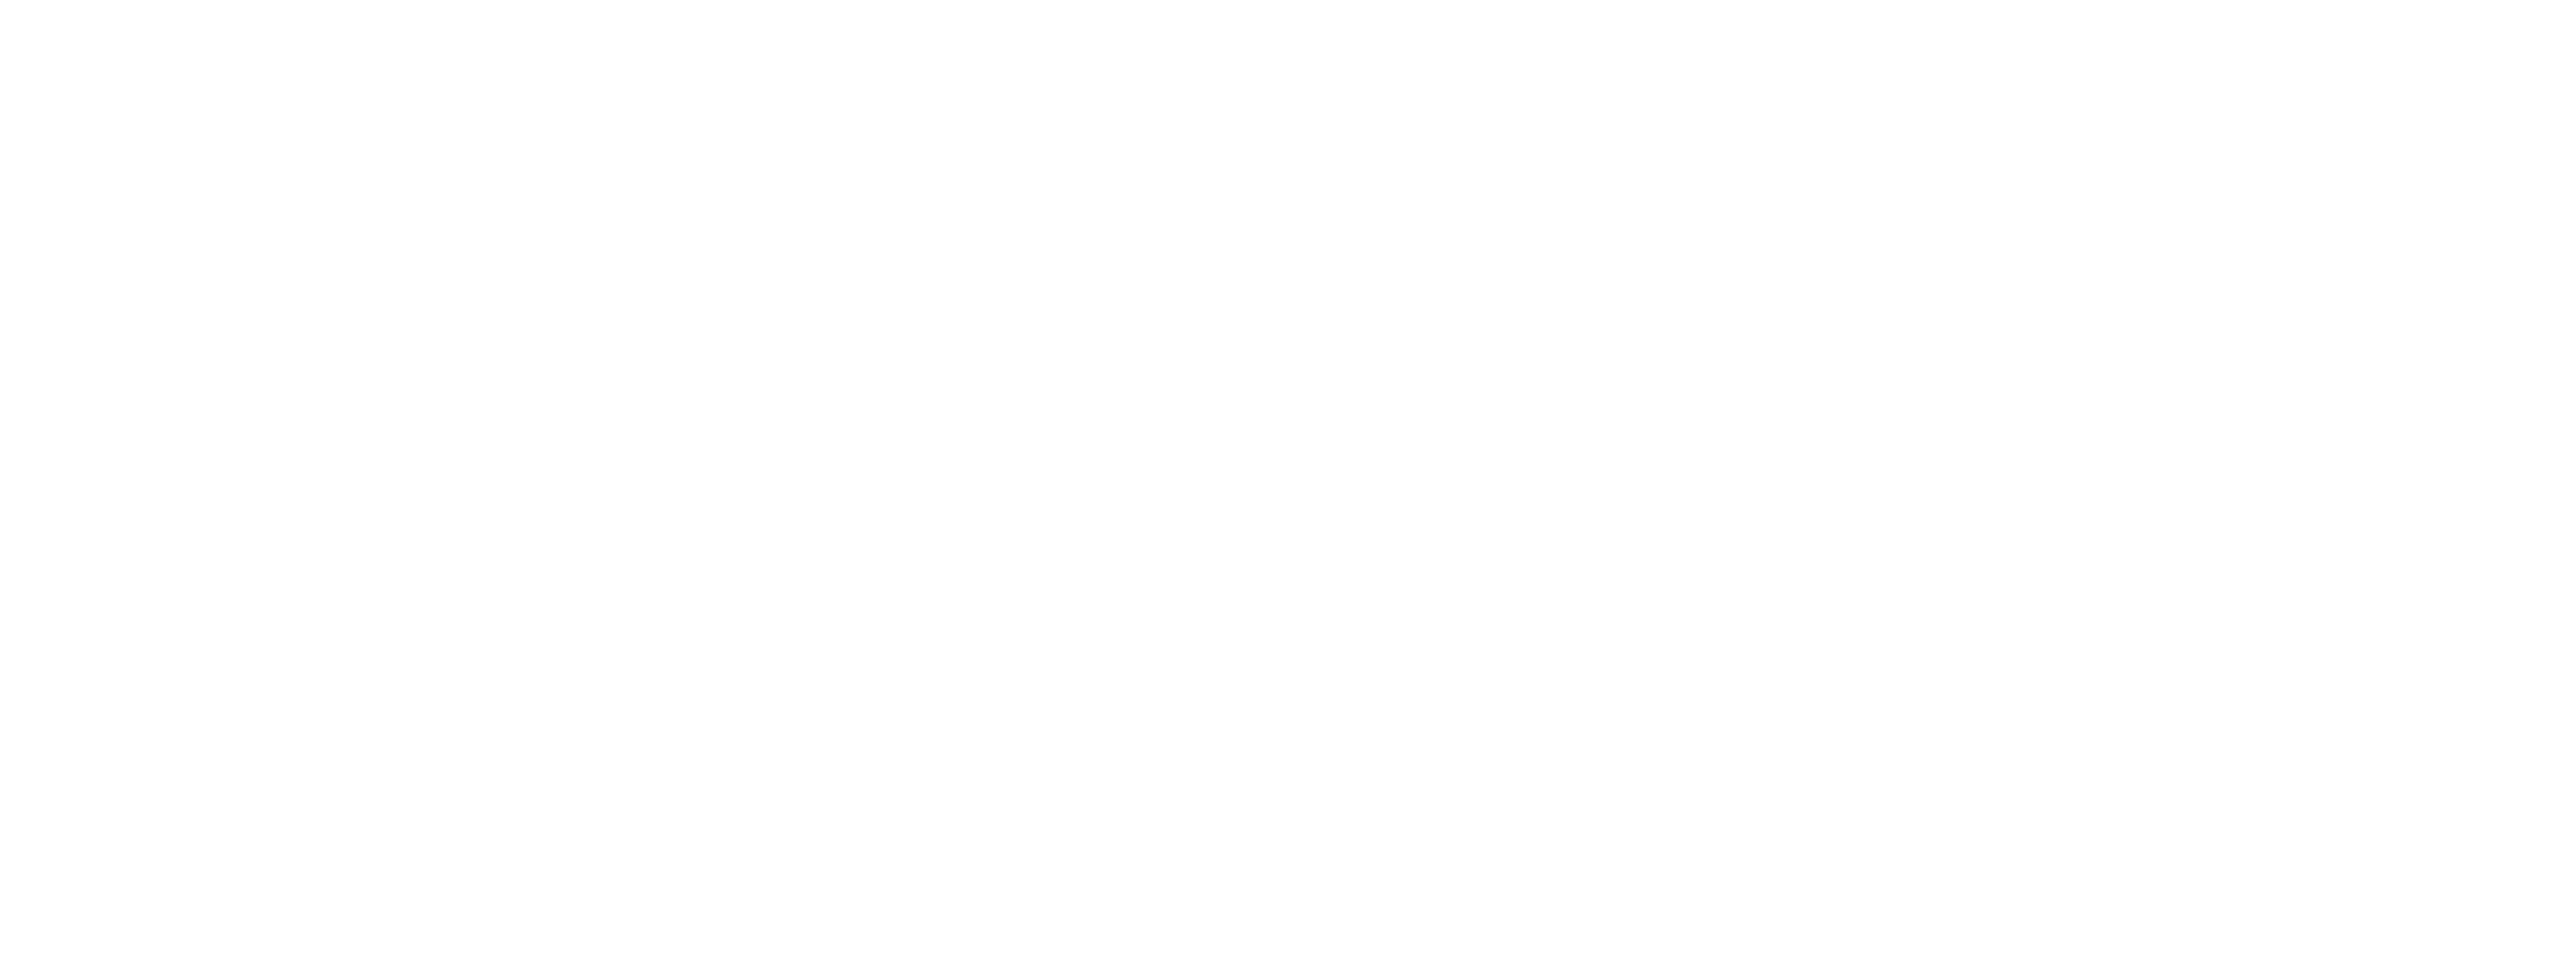 DPS Legal Counsel | Tennessee Business, Tax & Trademark Law